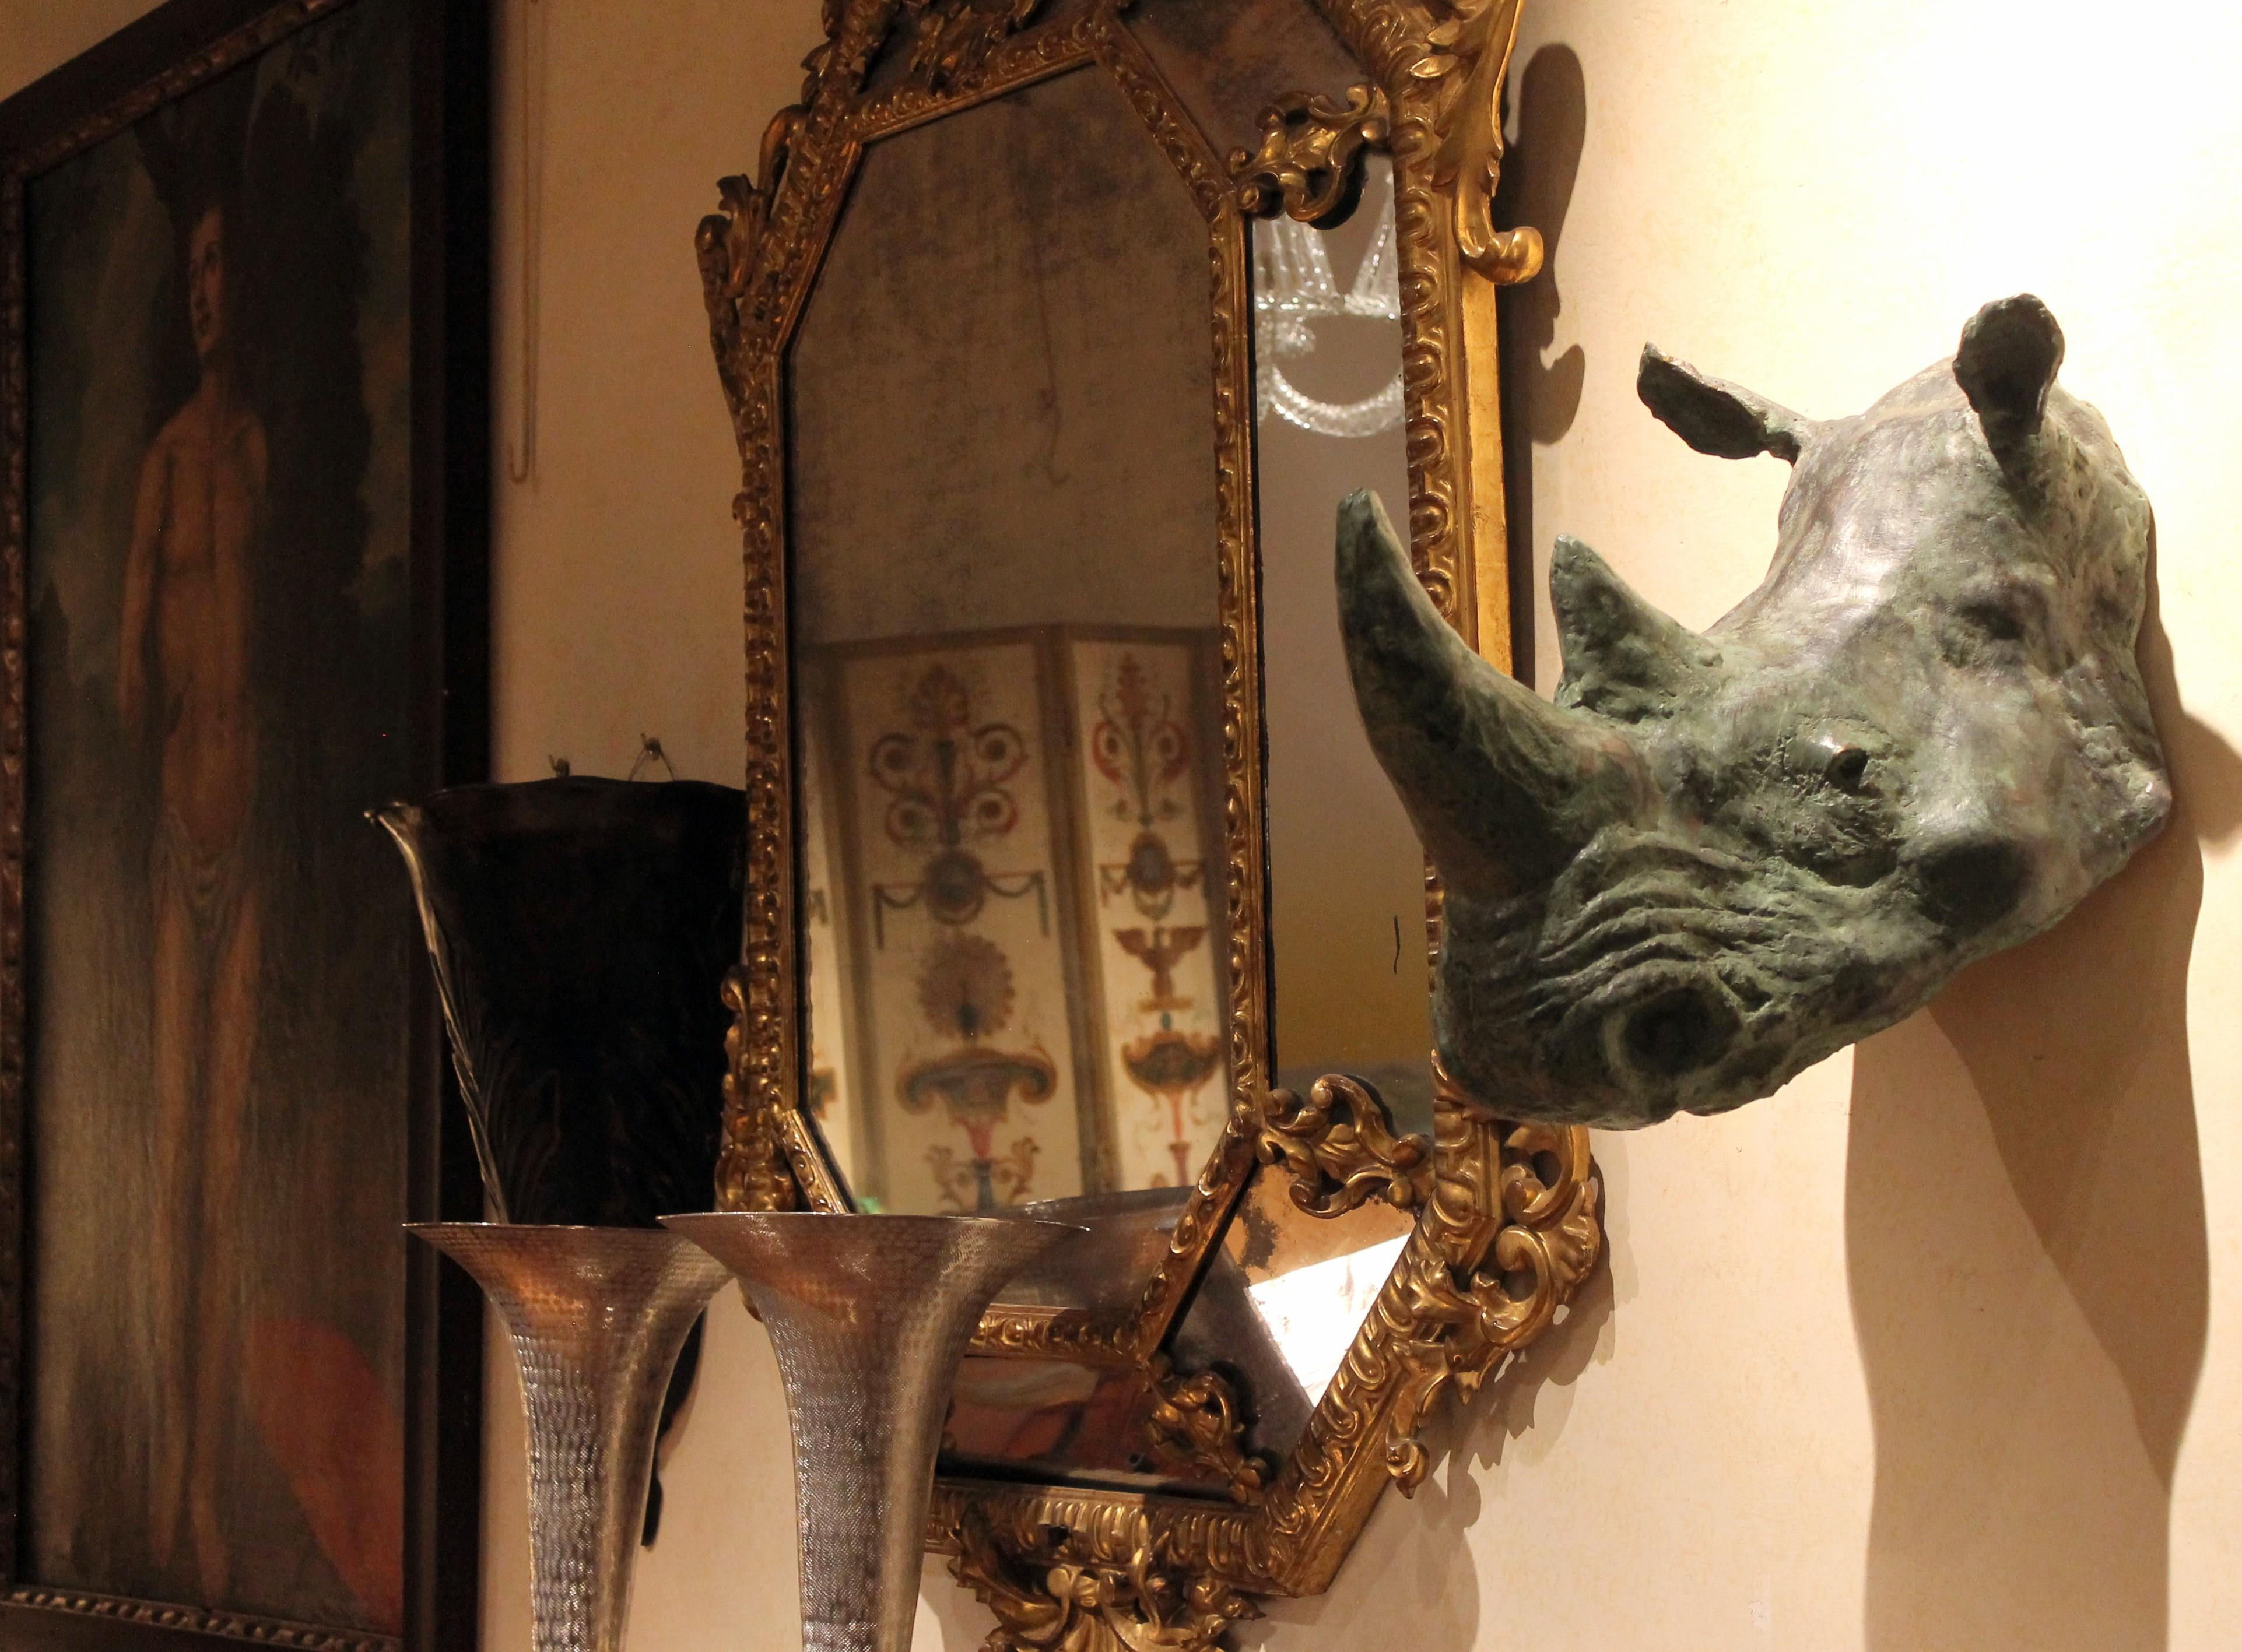 This contemporary bronze sculpture of rhinoceros head faithfully reproduces – in almost real size - one of the largest mammals in the world. Proud and mighty, this rhino trophy head sculpture with green patina finish is a powerful interior statement